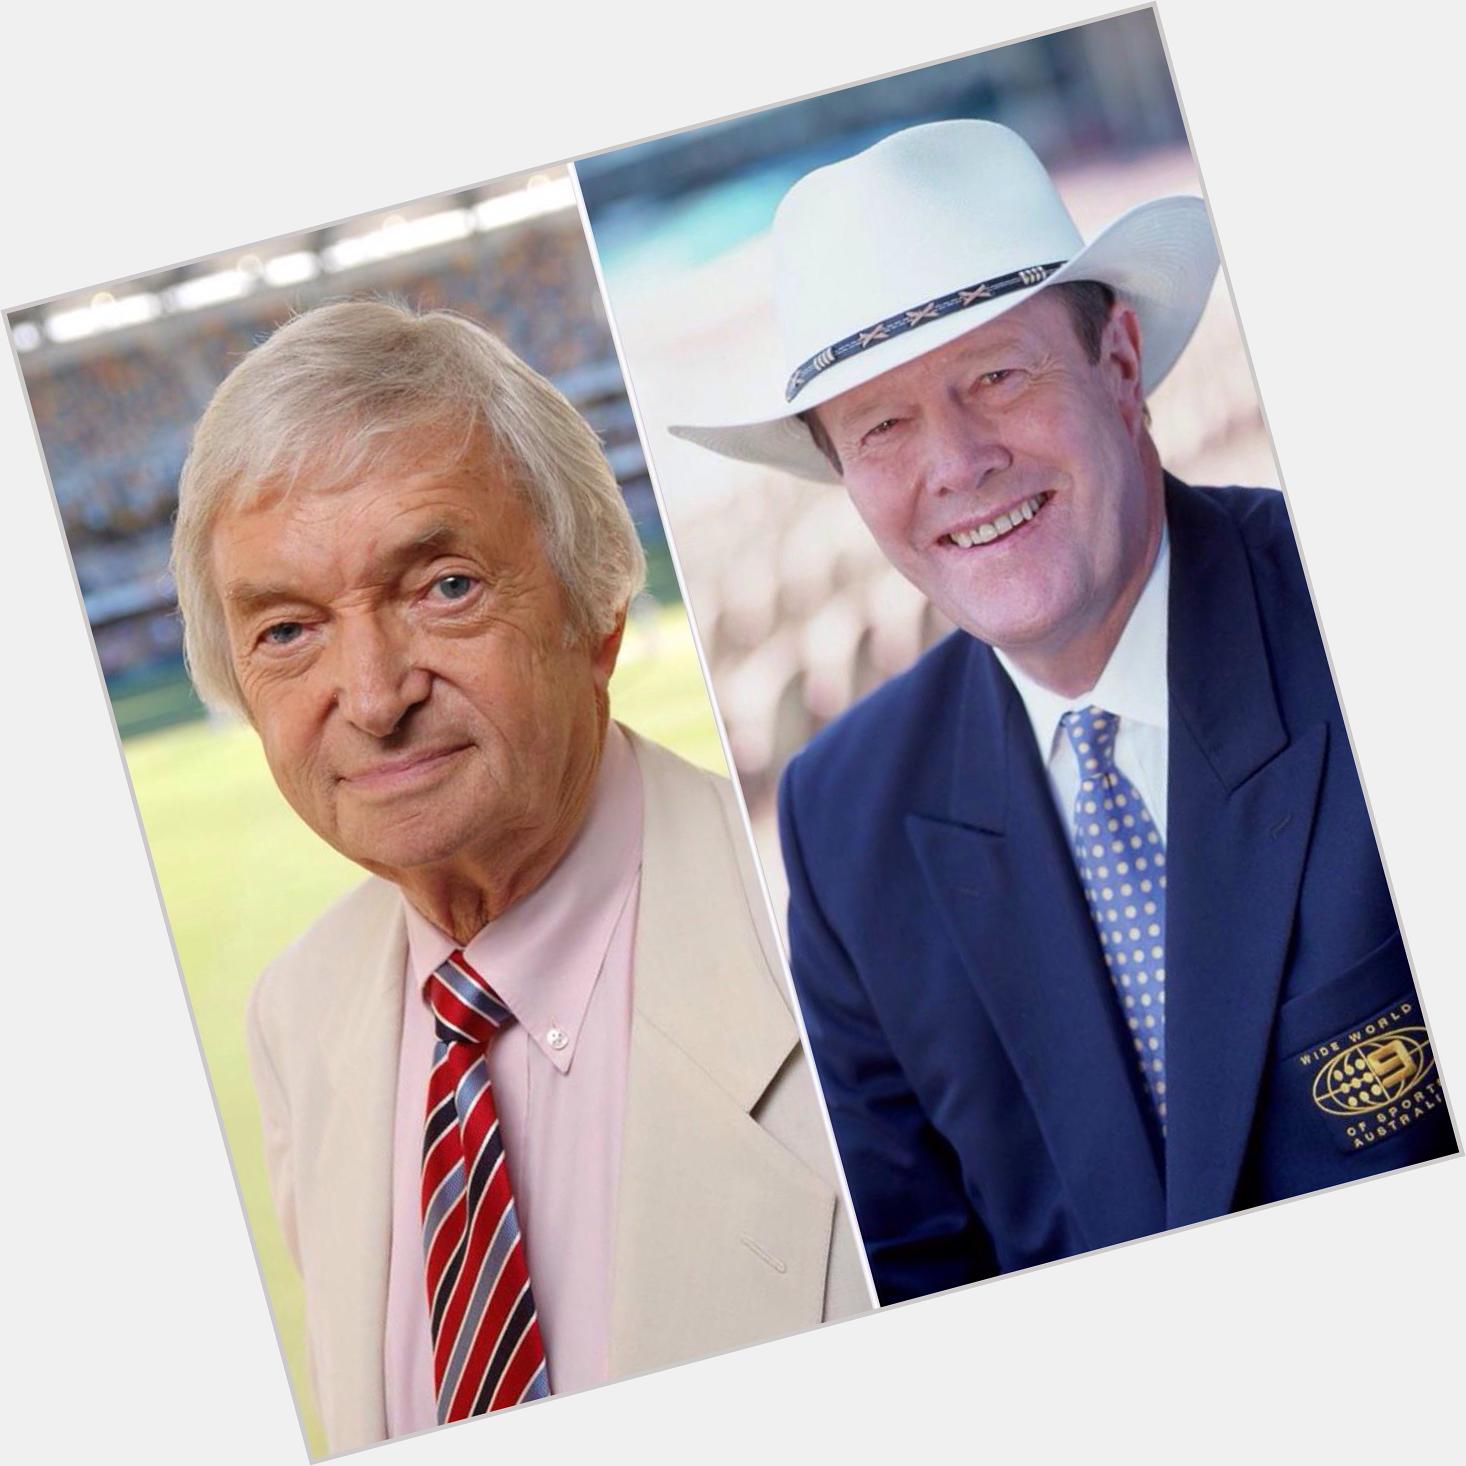 Happy Birthday to both Richie Benaud and Tony Grieg. Great memories, what a \marvellous\ day. 